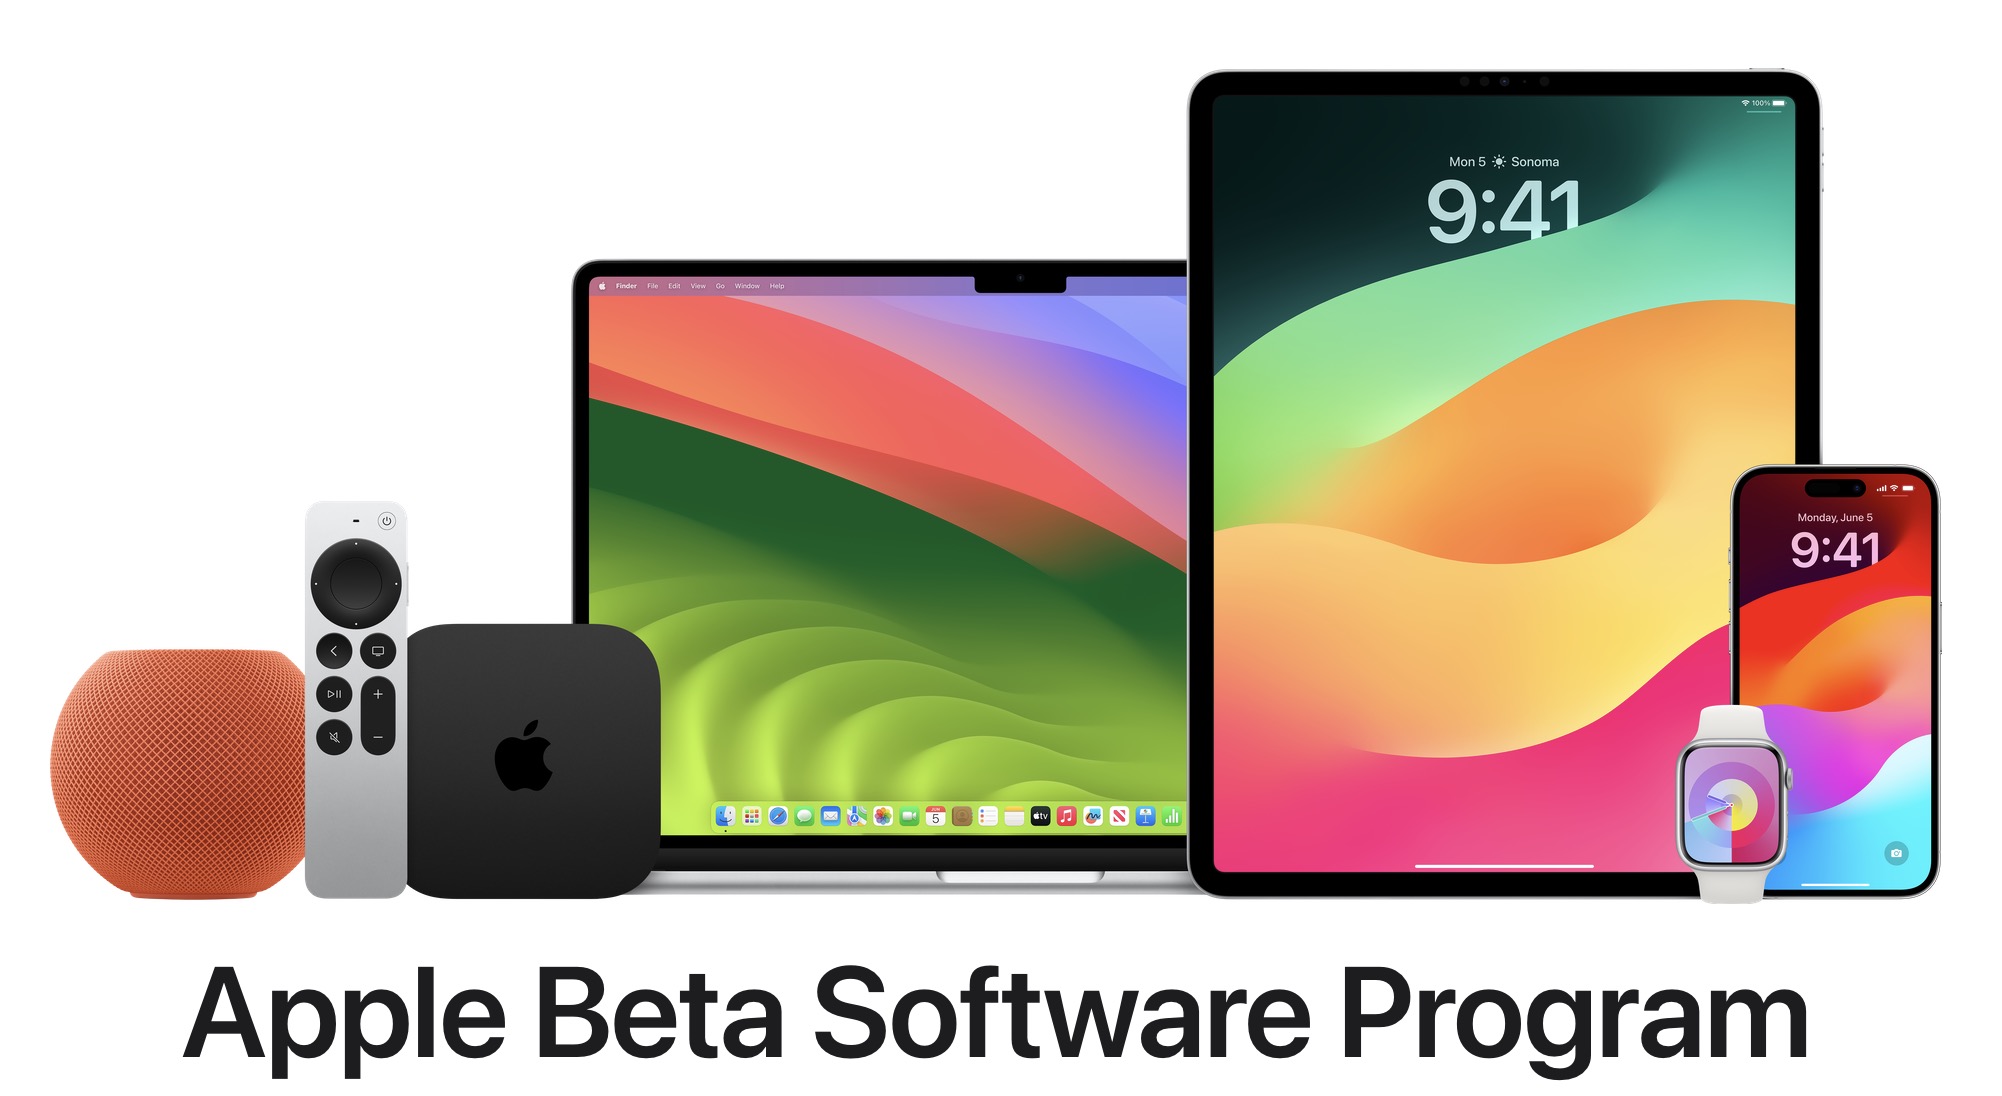 Apple's 2023 public beta operating systems